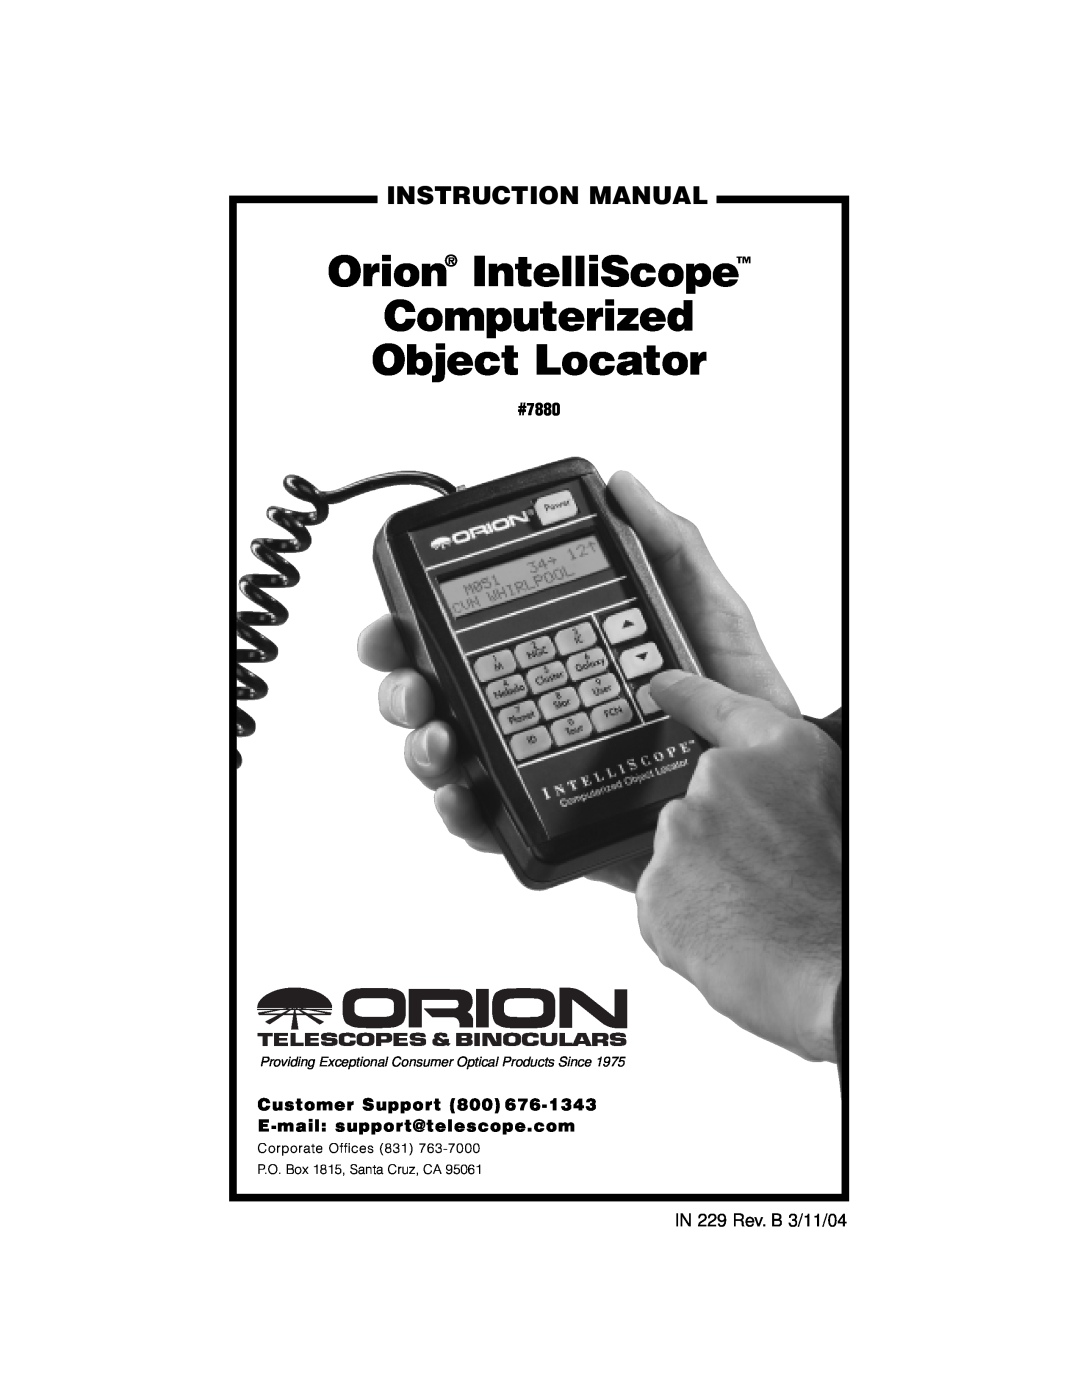 Orion instruction manual Orion IntelliScope Computerized Object Locator, Instruction Manual, #7880 